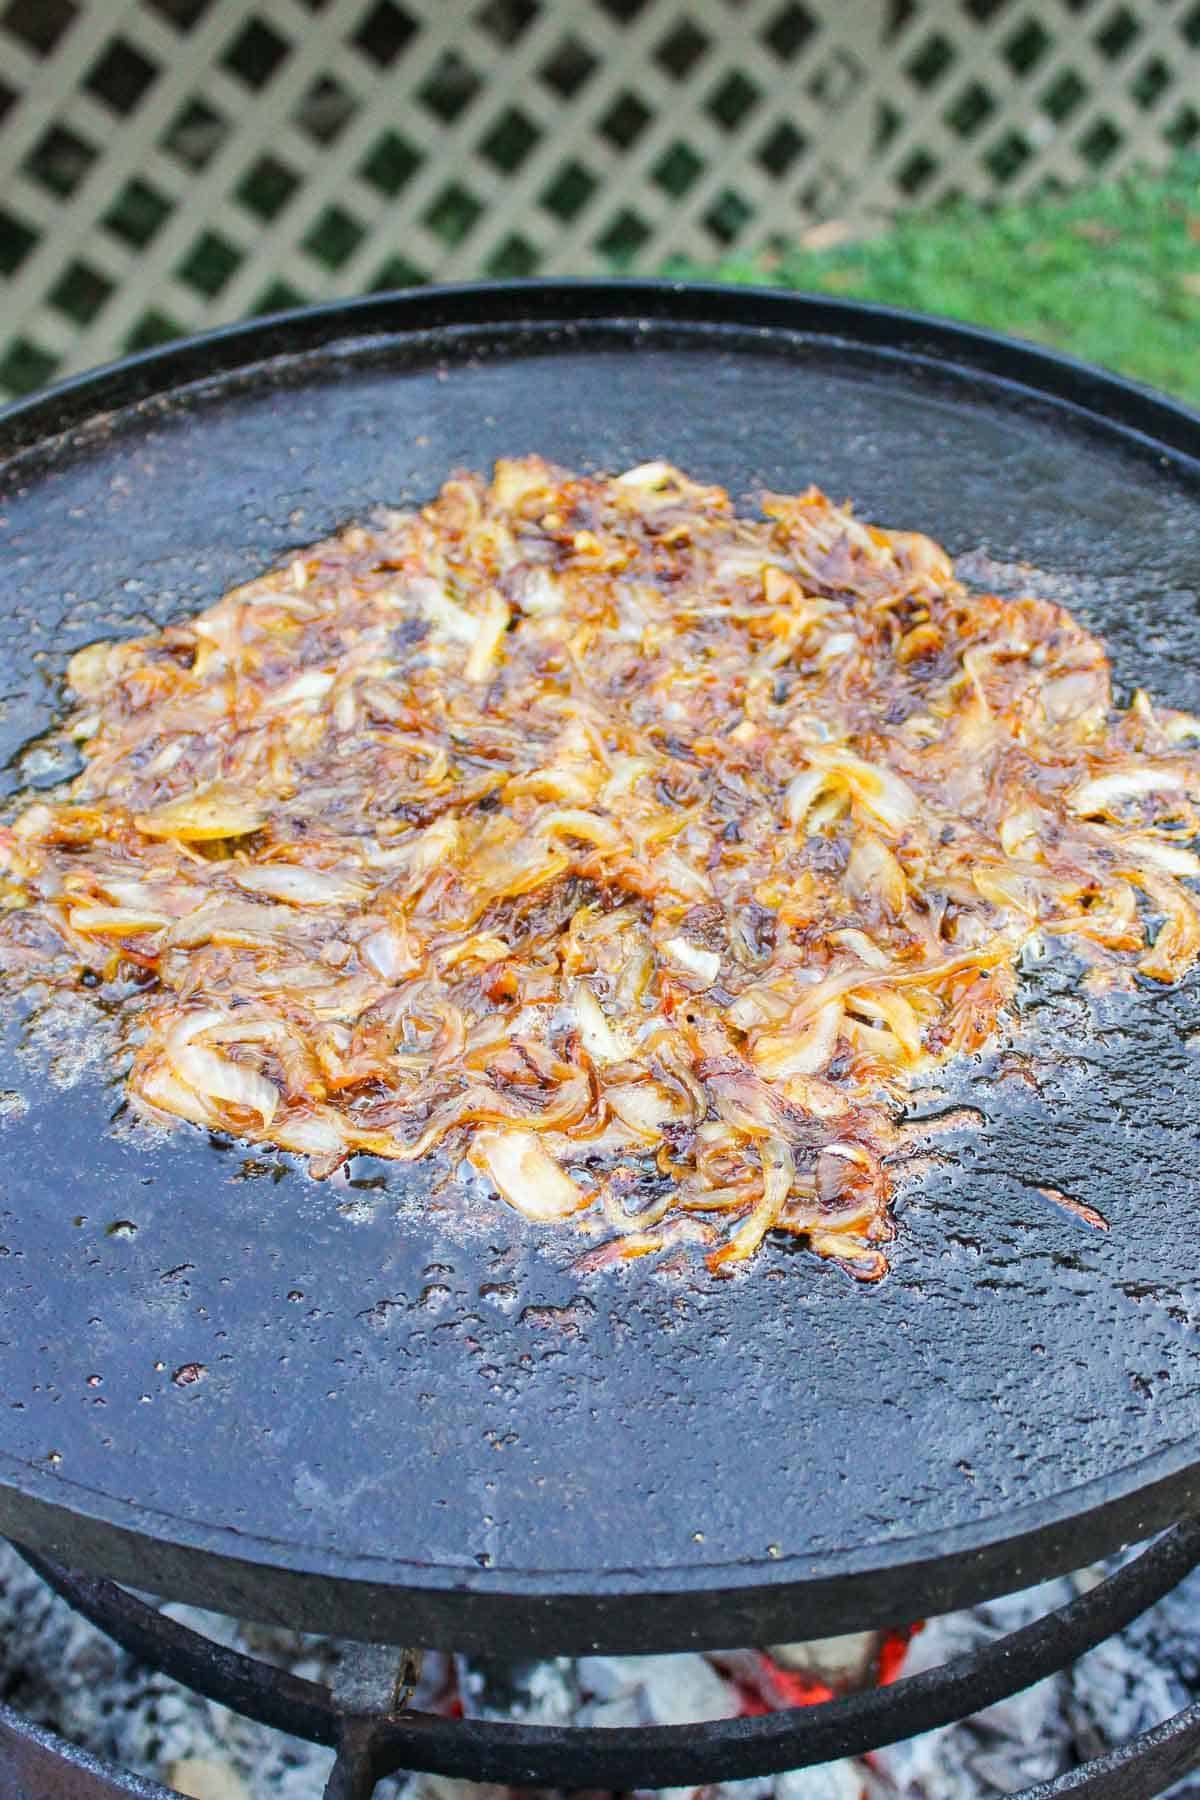 The onions as they brown on the skillet over the flames. 